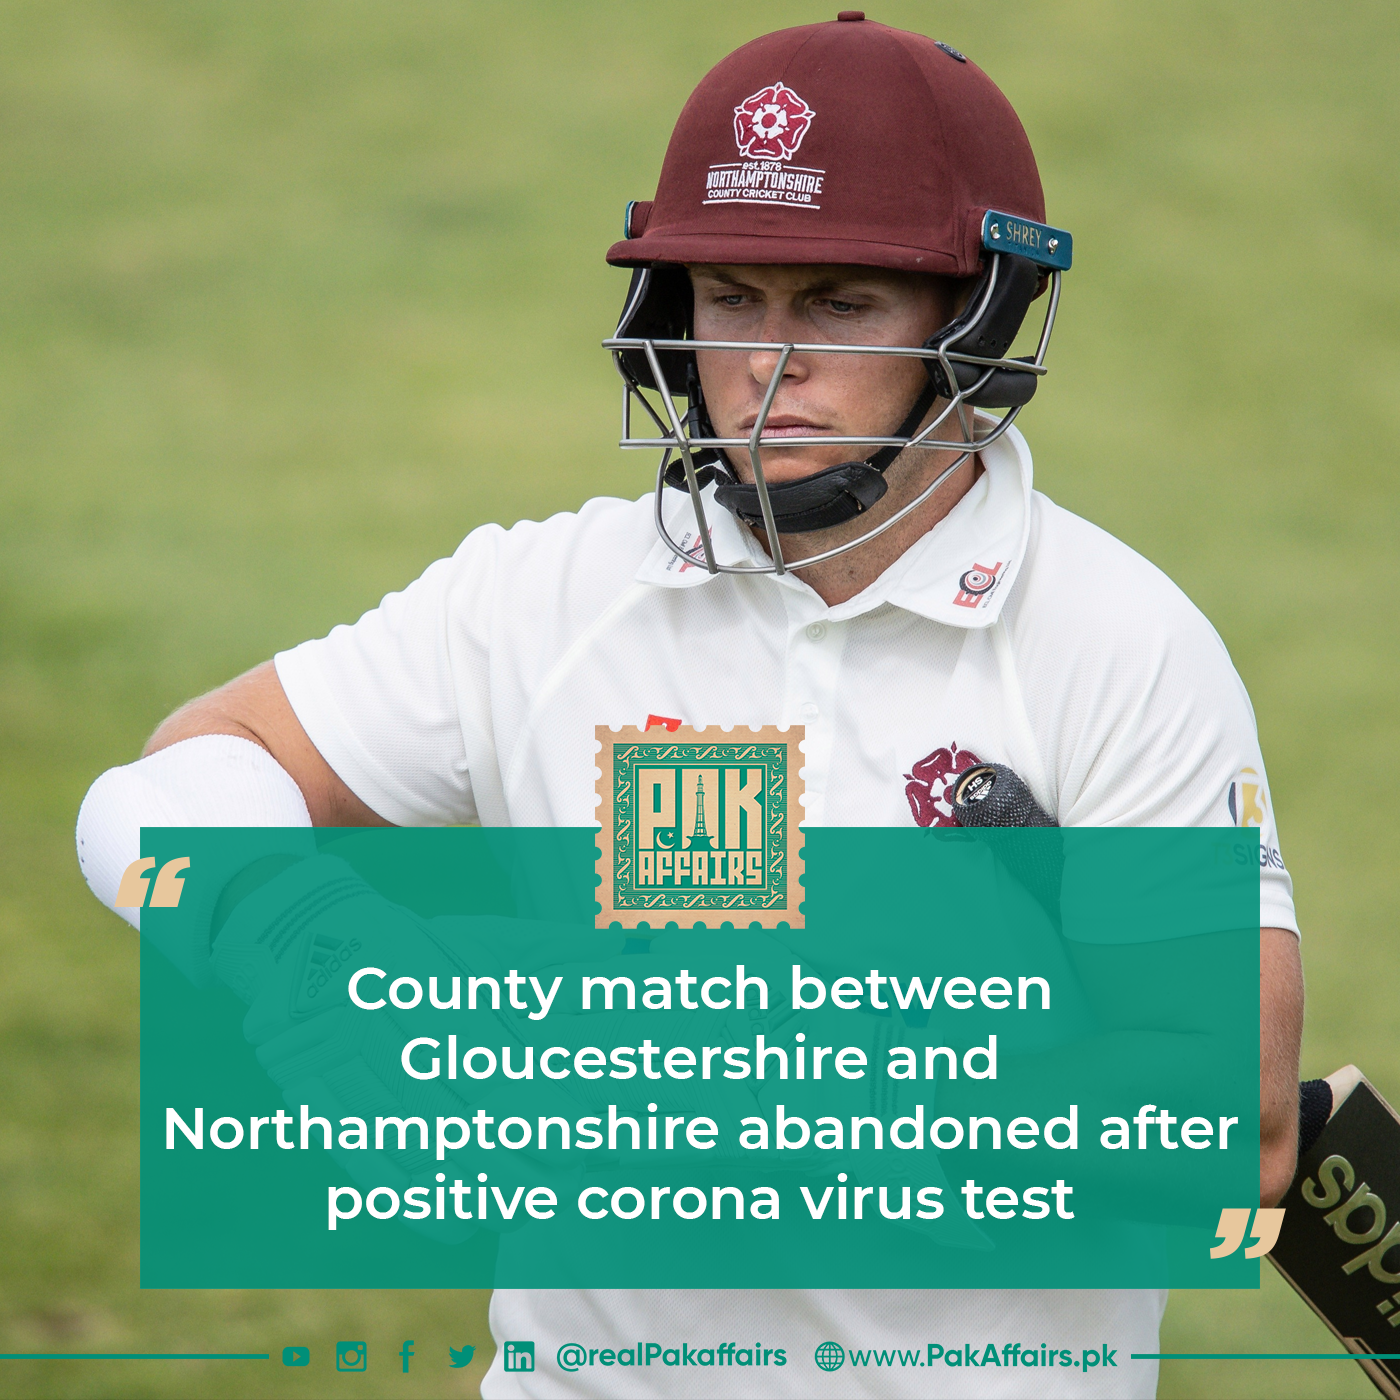 County match between Gloucestershire and Northamptonshire abandoned after positive corona virus test